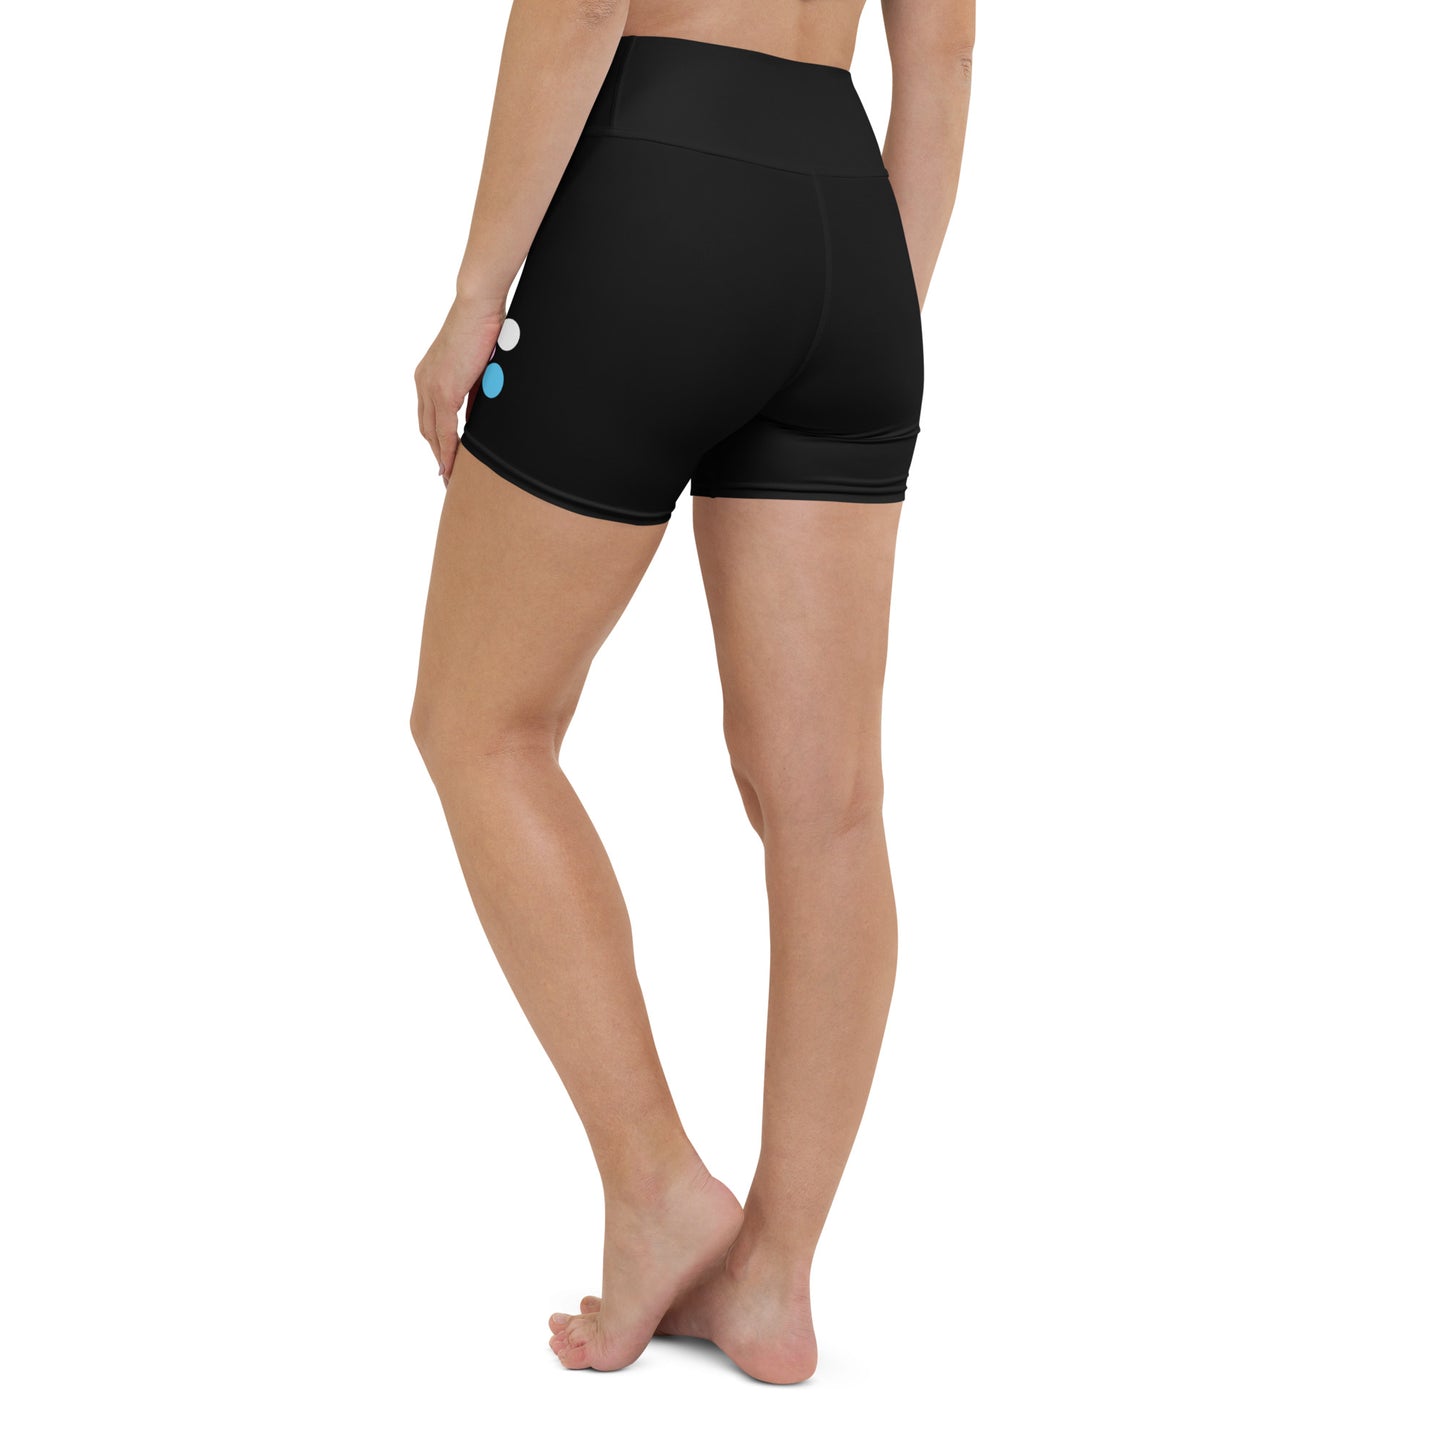 Teen Blue Pink White Pride 'Five Dots' Black Pilates & Fitness Shorts